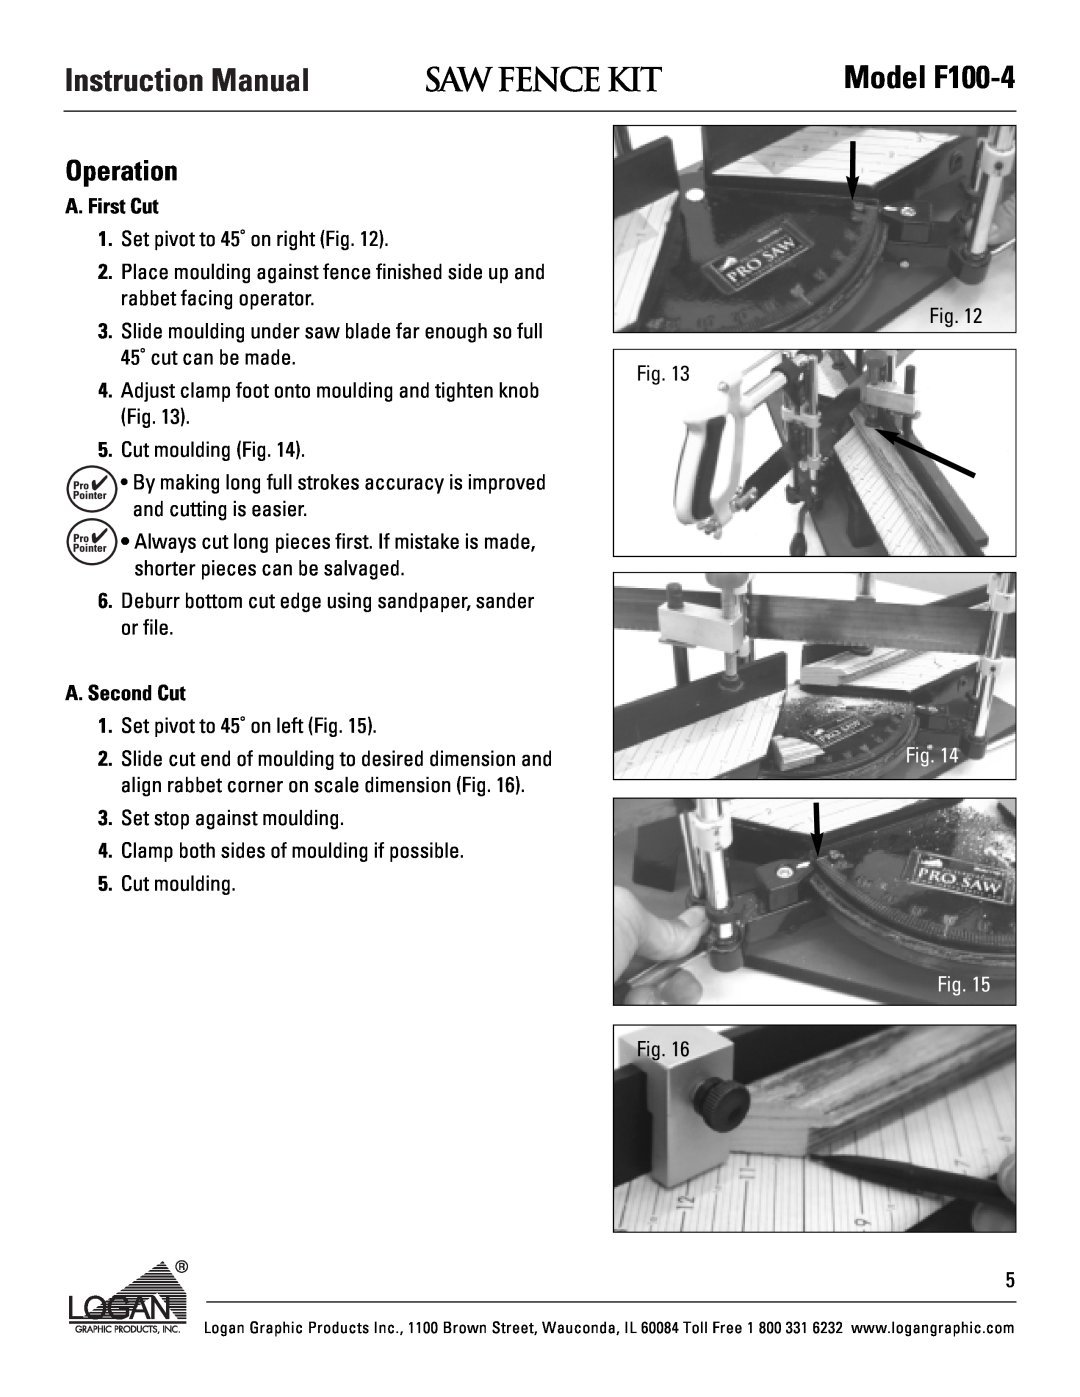 Logan Graphic Products instruction manual Operation, A. First Cut, A. Second Cut, Saw Fence Kit, Model F100-4 